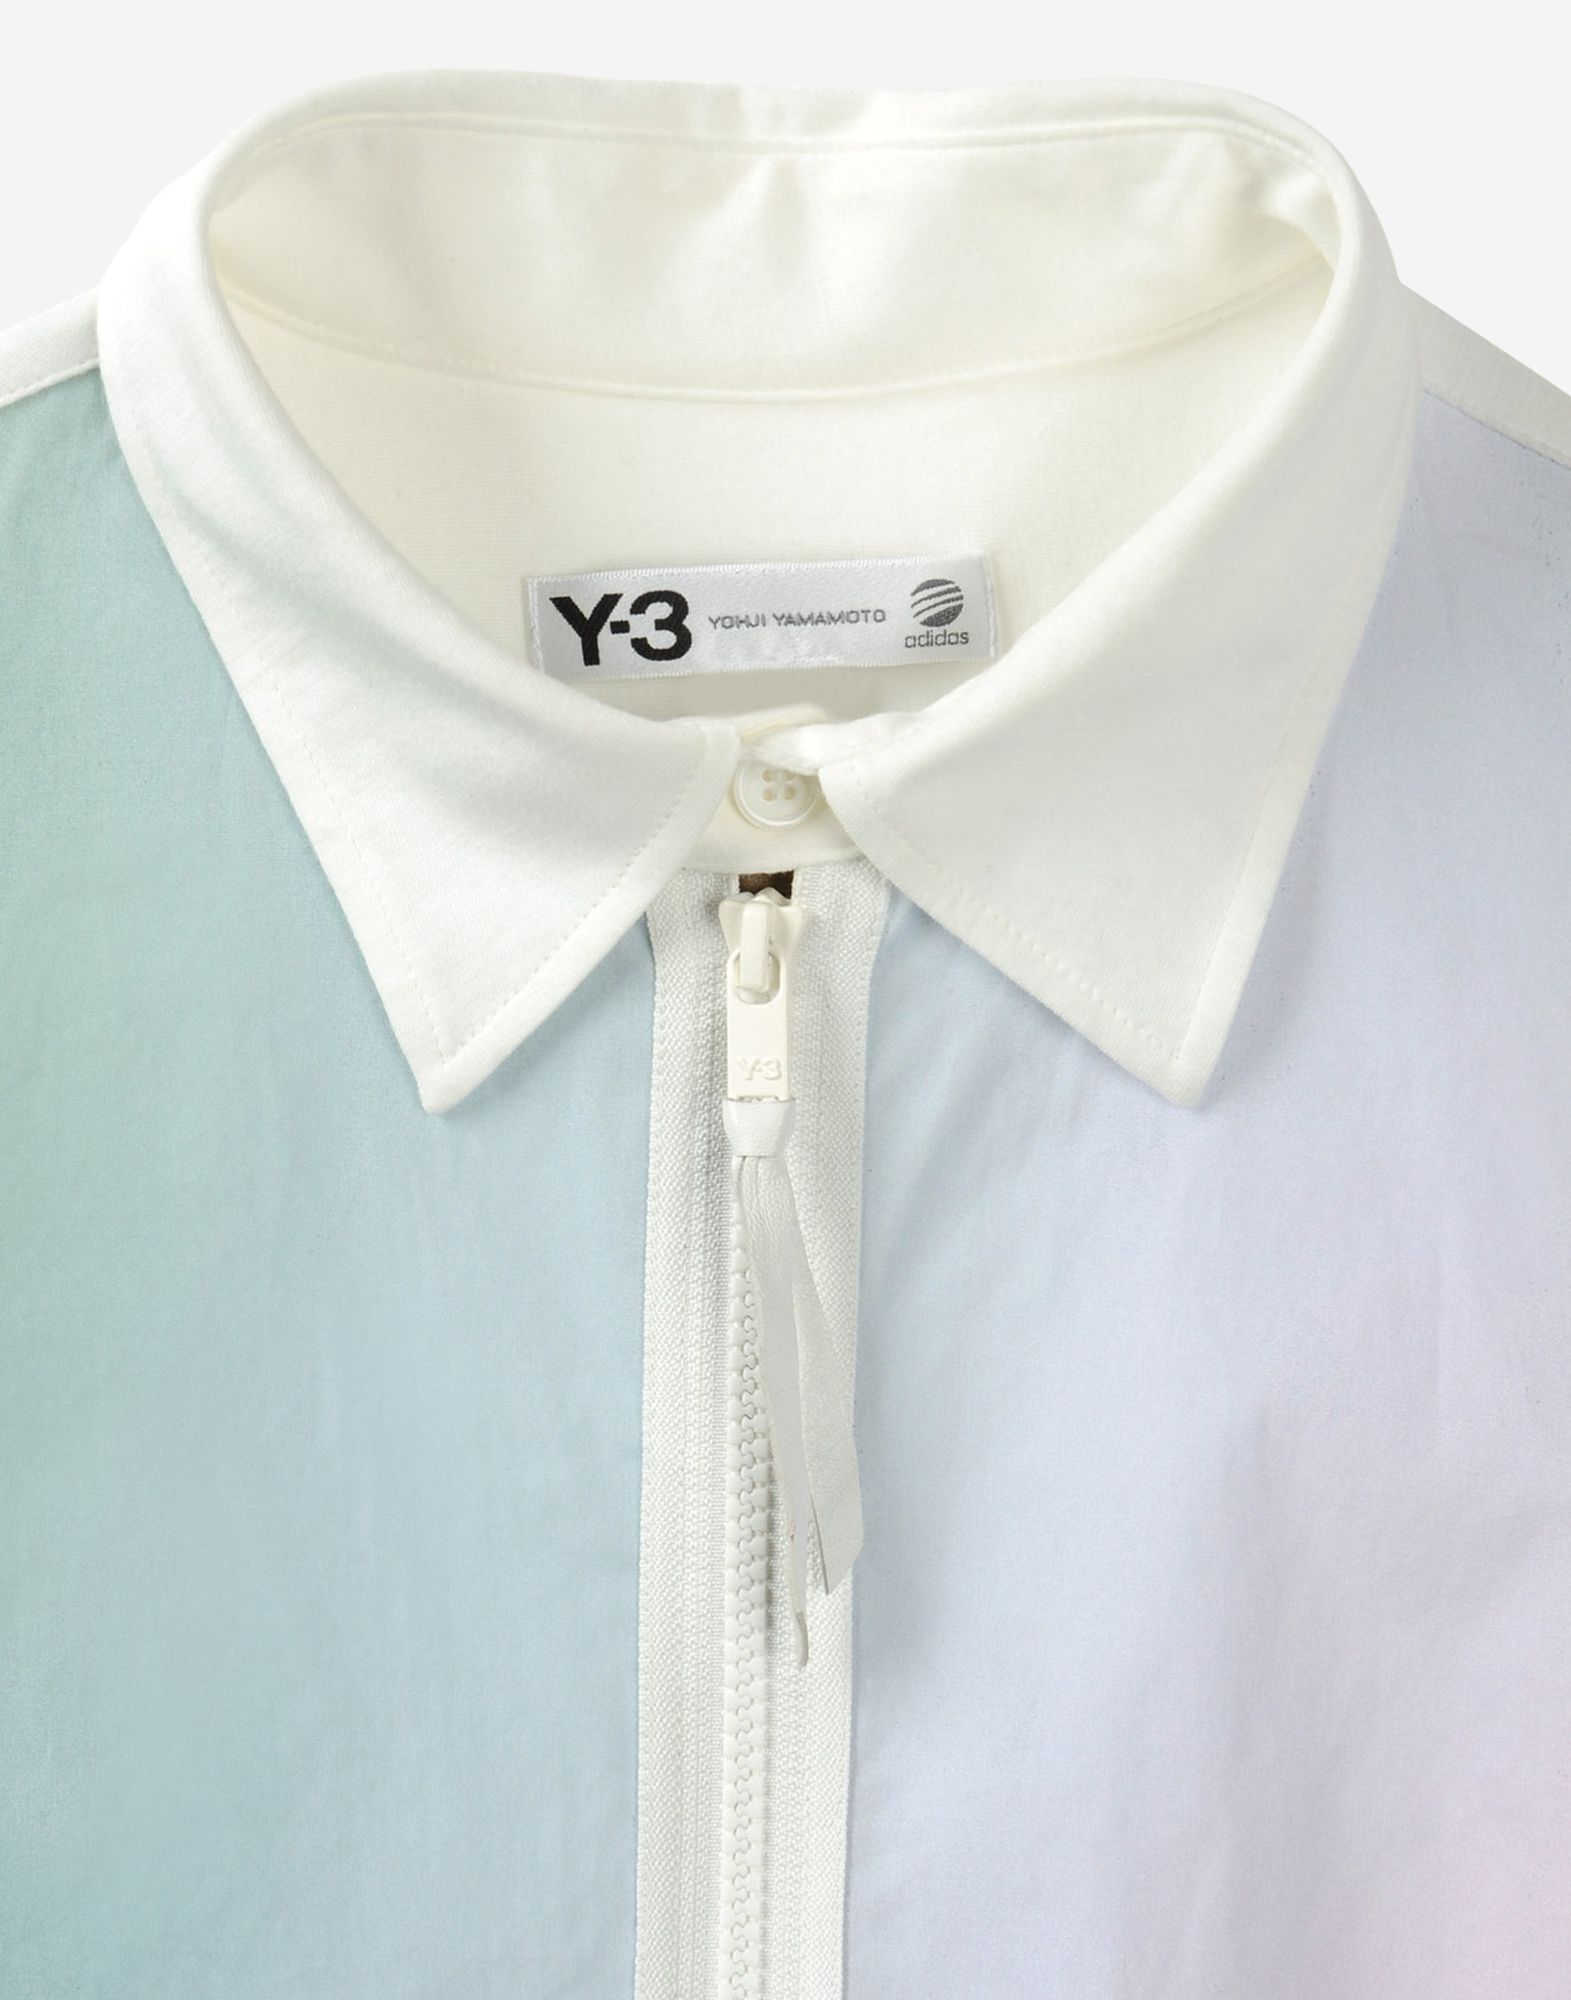 Y 3 Workers Shirt for Men | Adidas Y-3 Official Store